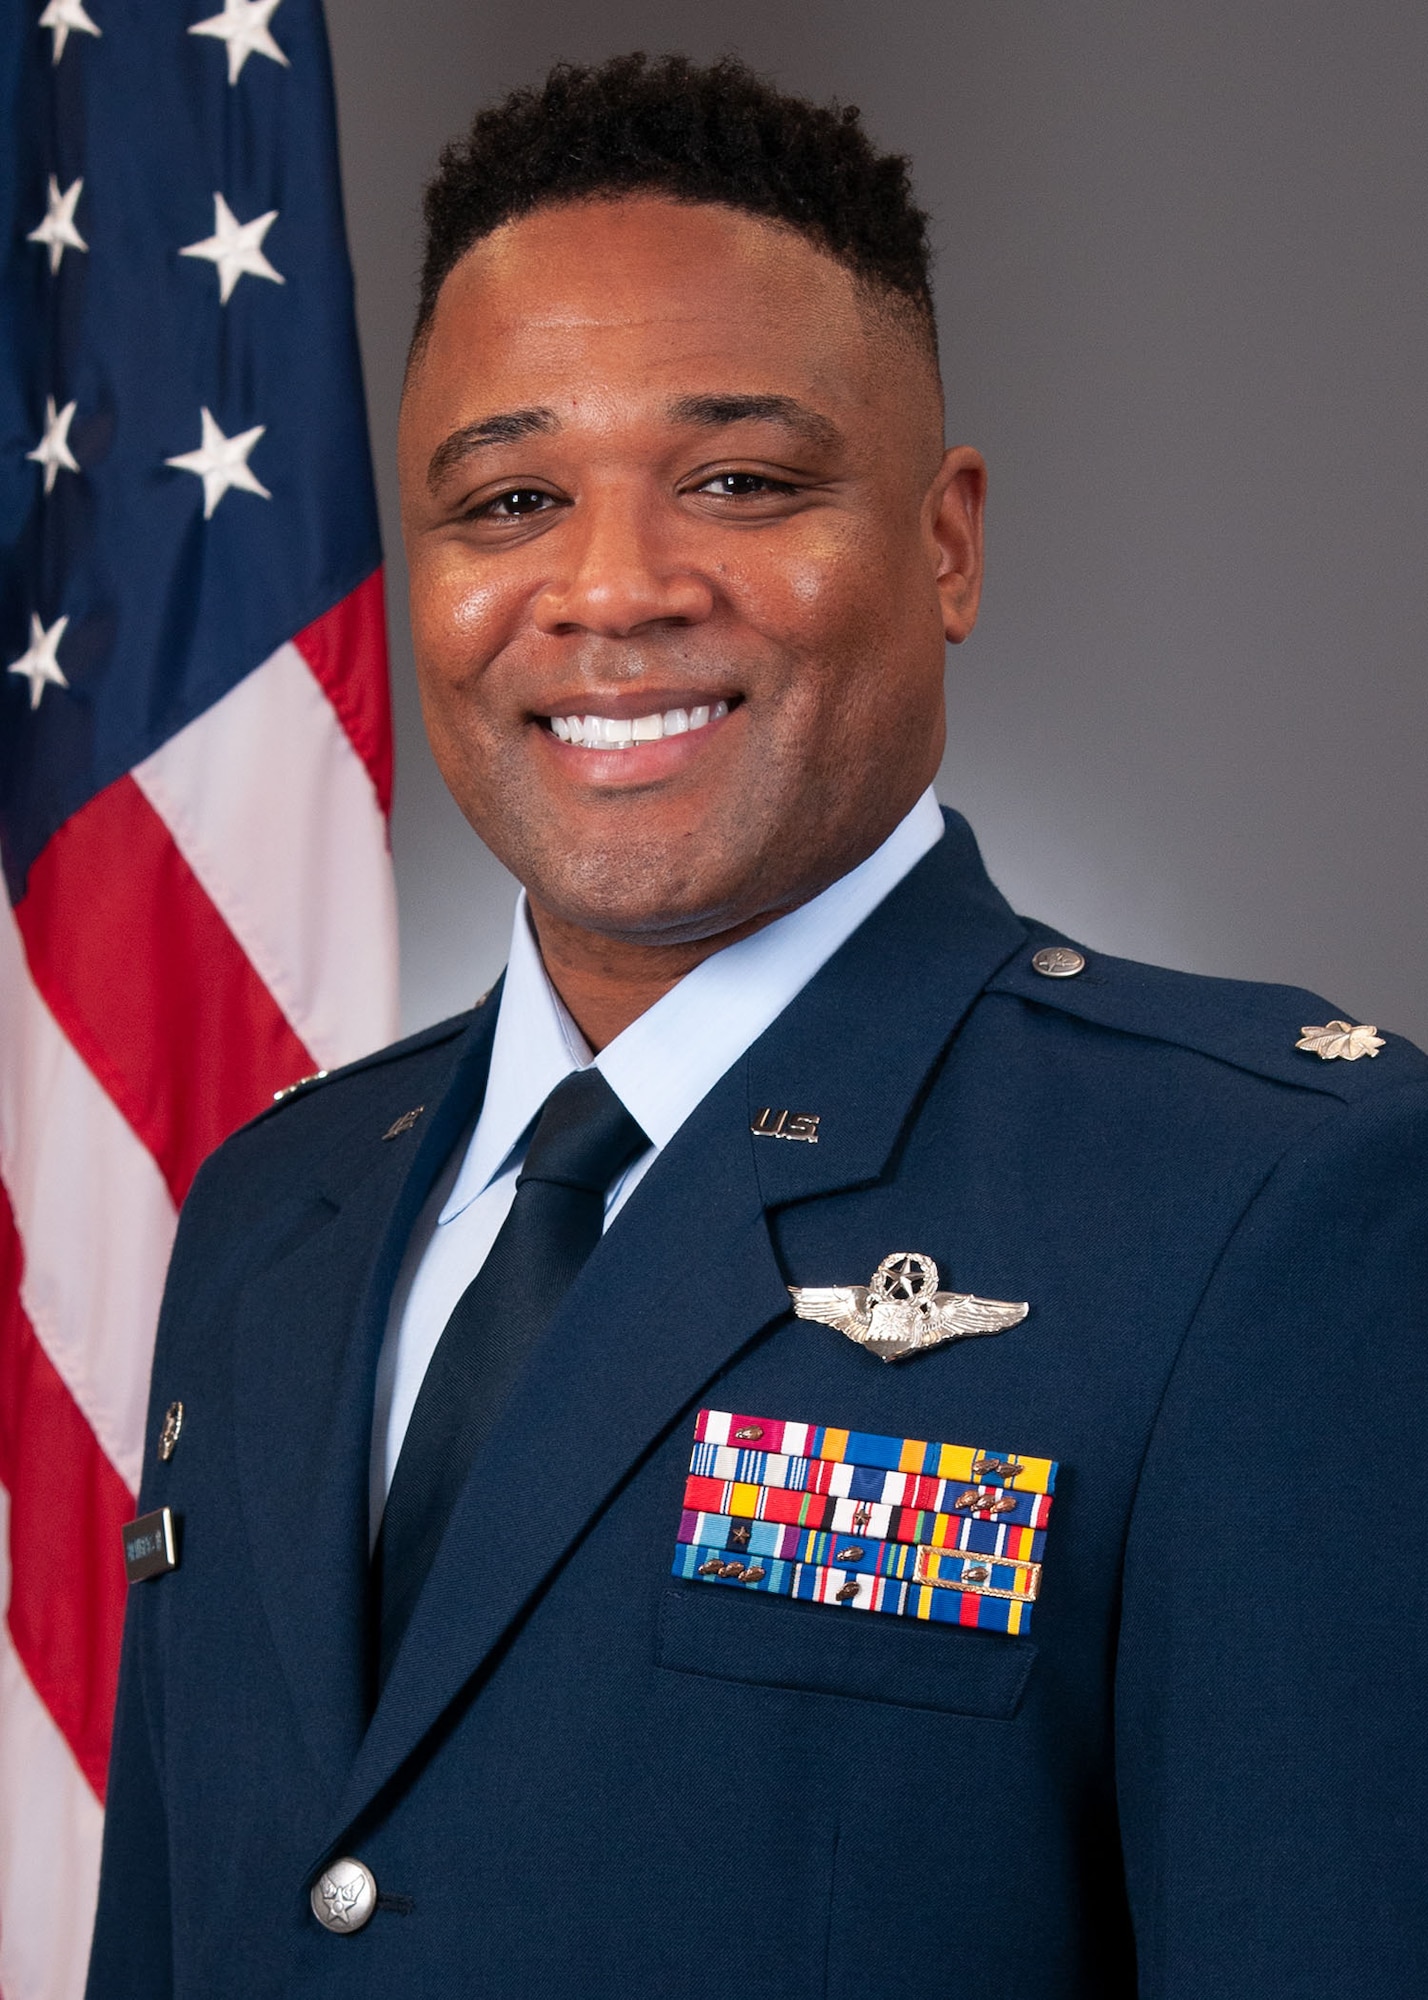 Photo of Airman posing for photo